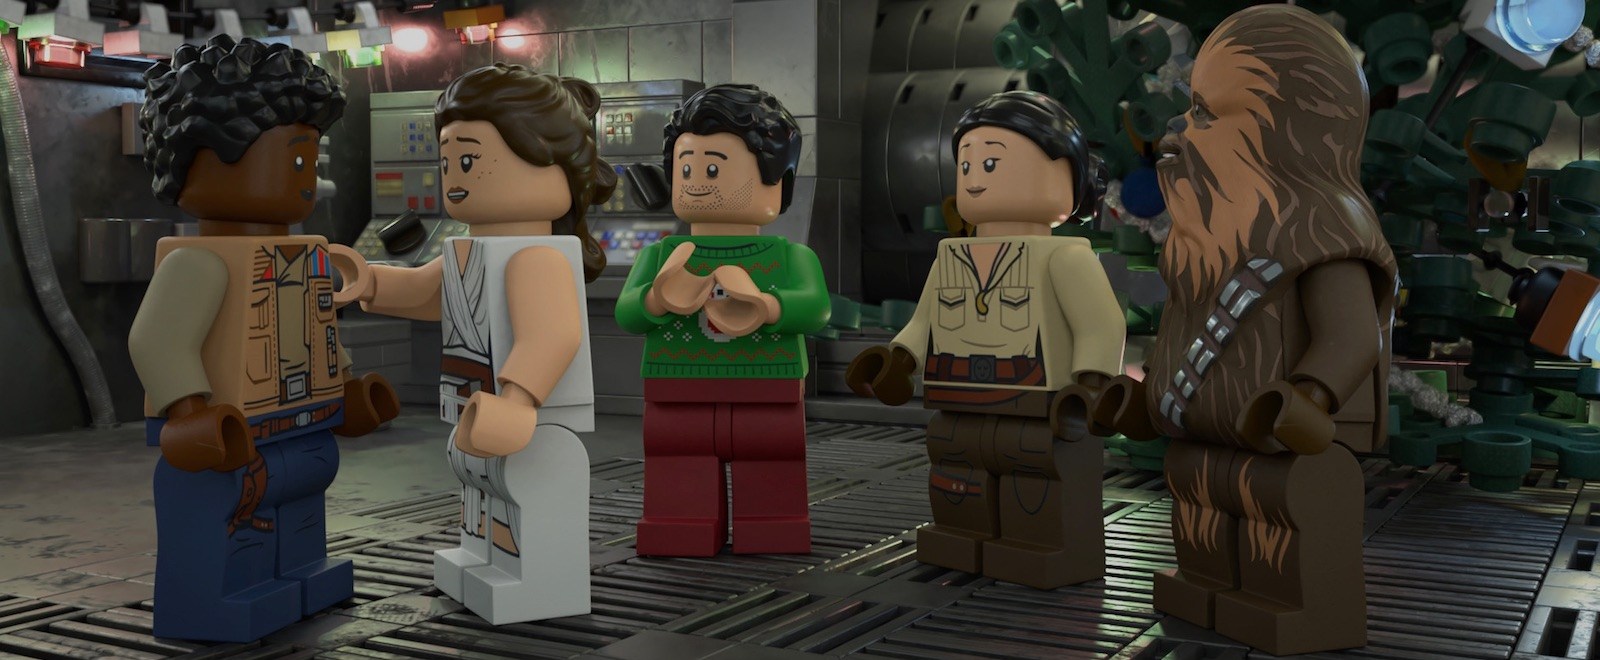 lego star wars holiday special